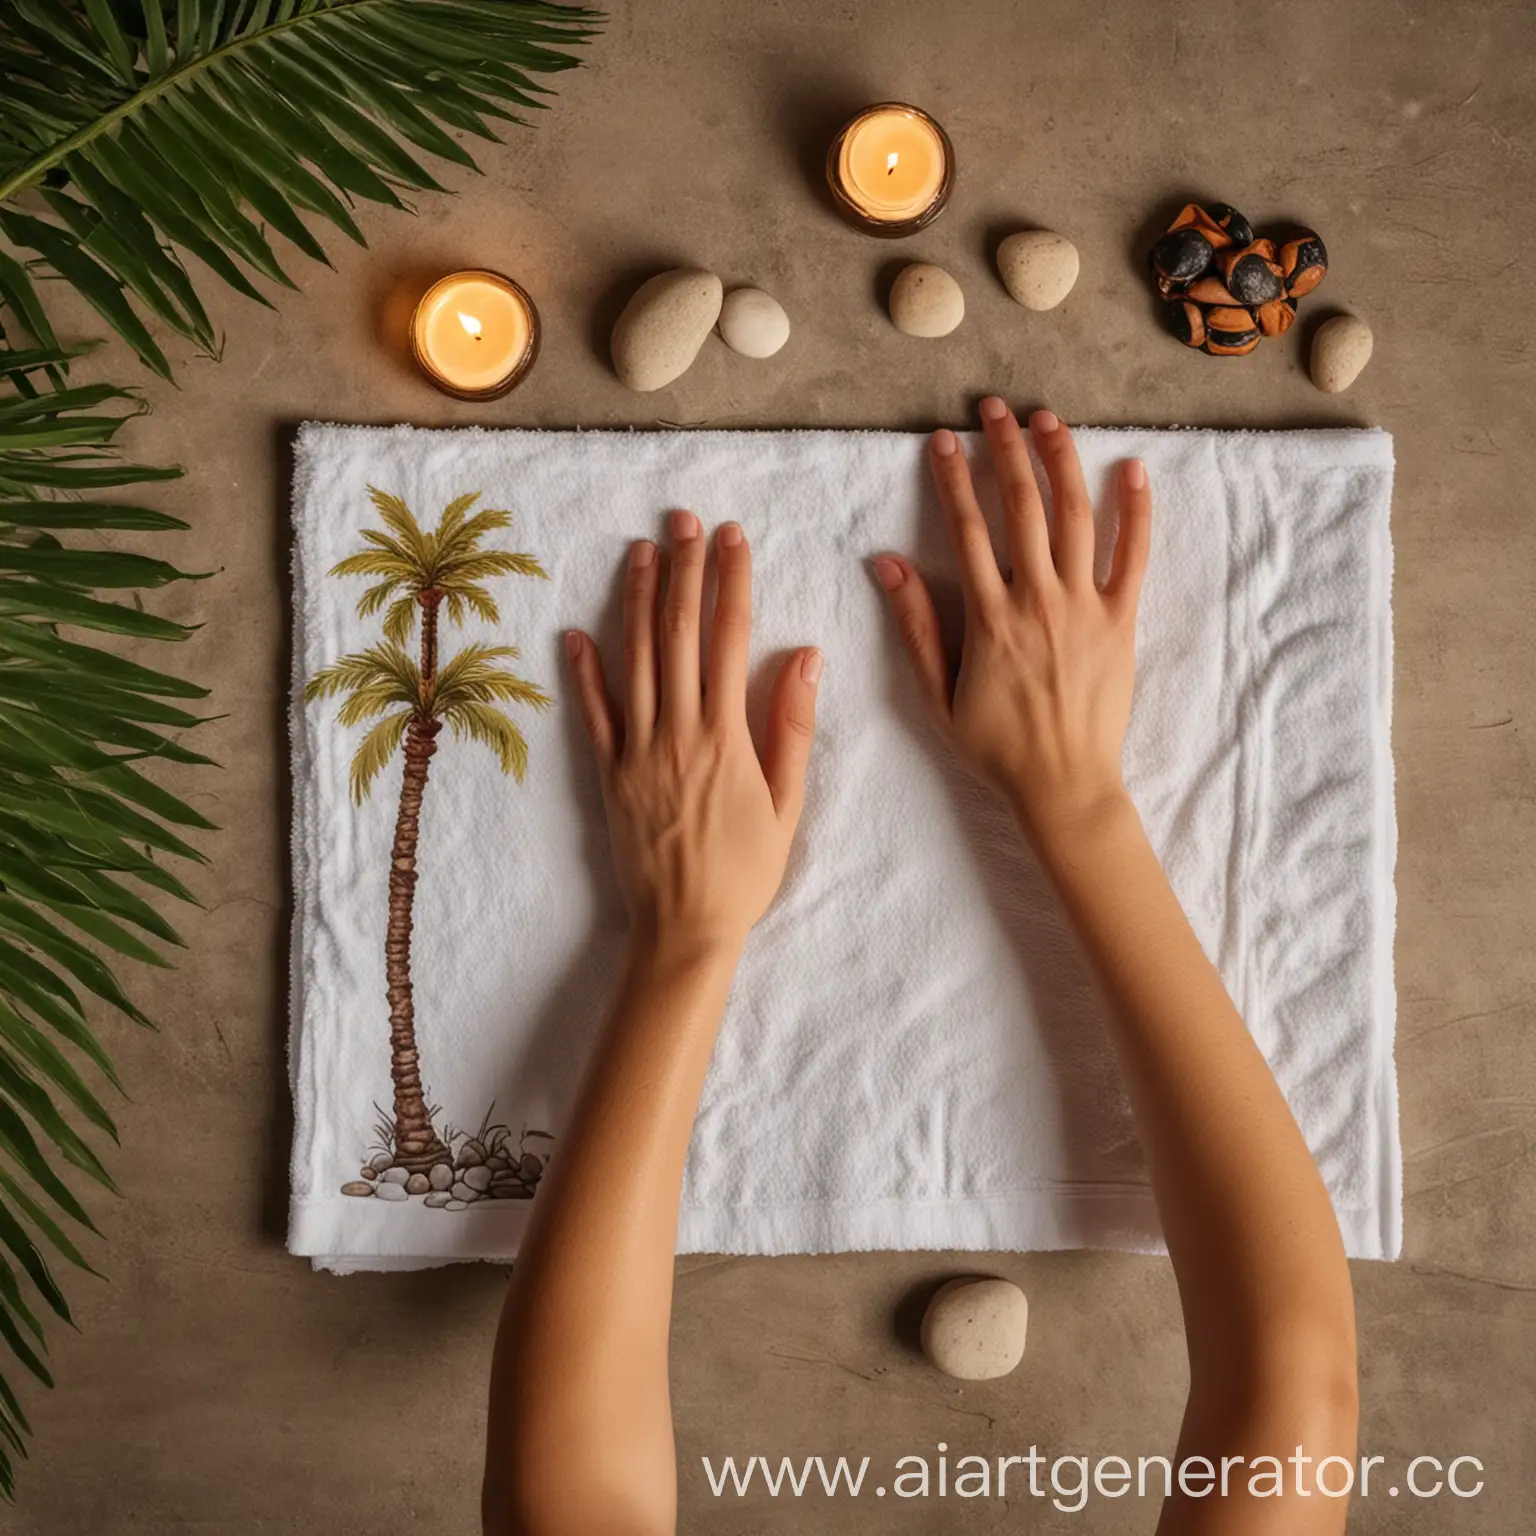 Spanish-Hand-Massage-Candle-Towel-Stones-and-Palm-Trees